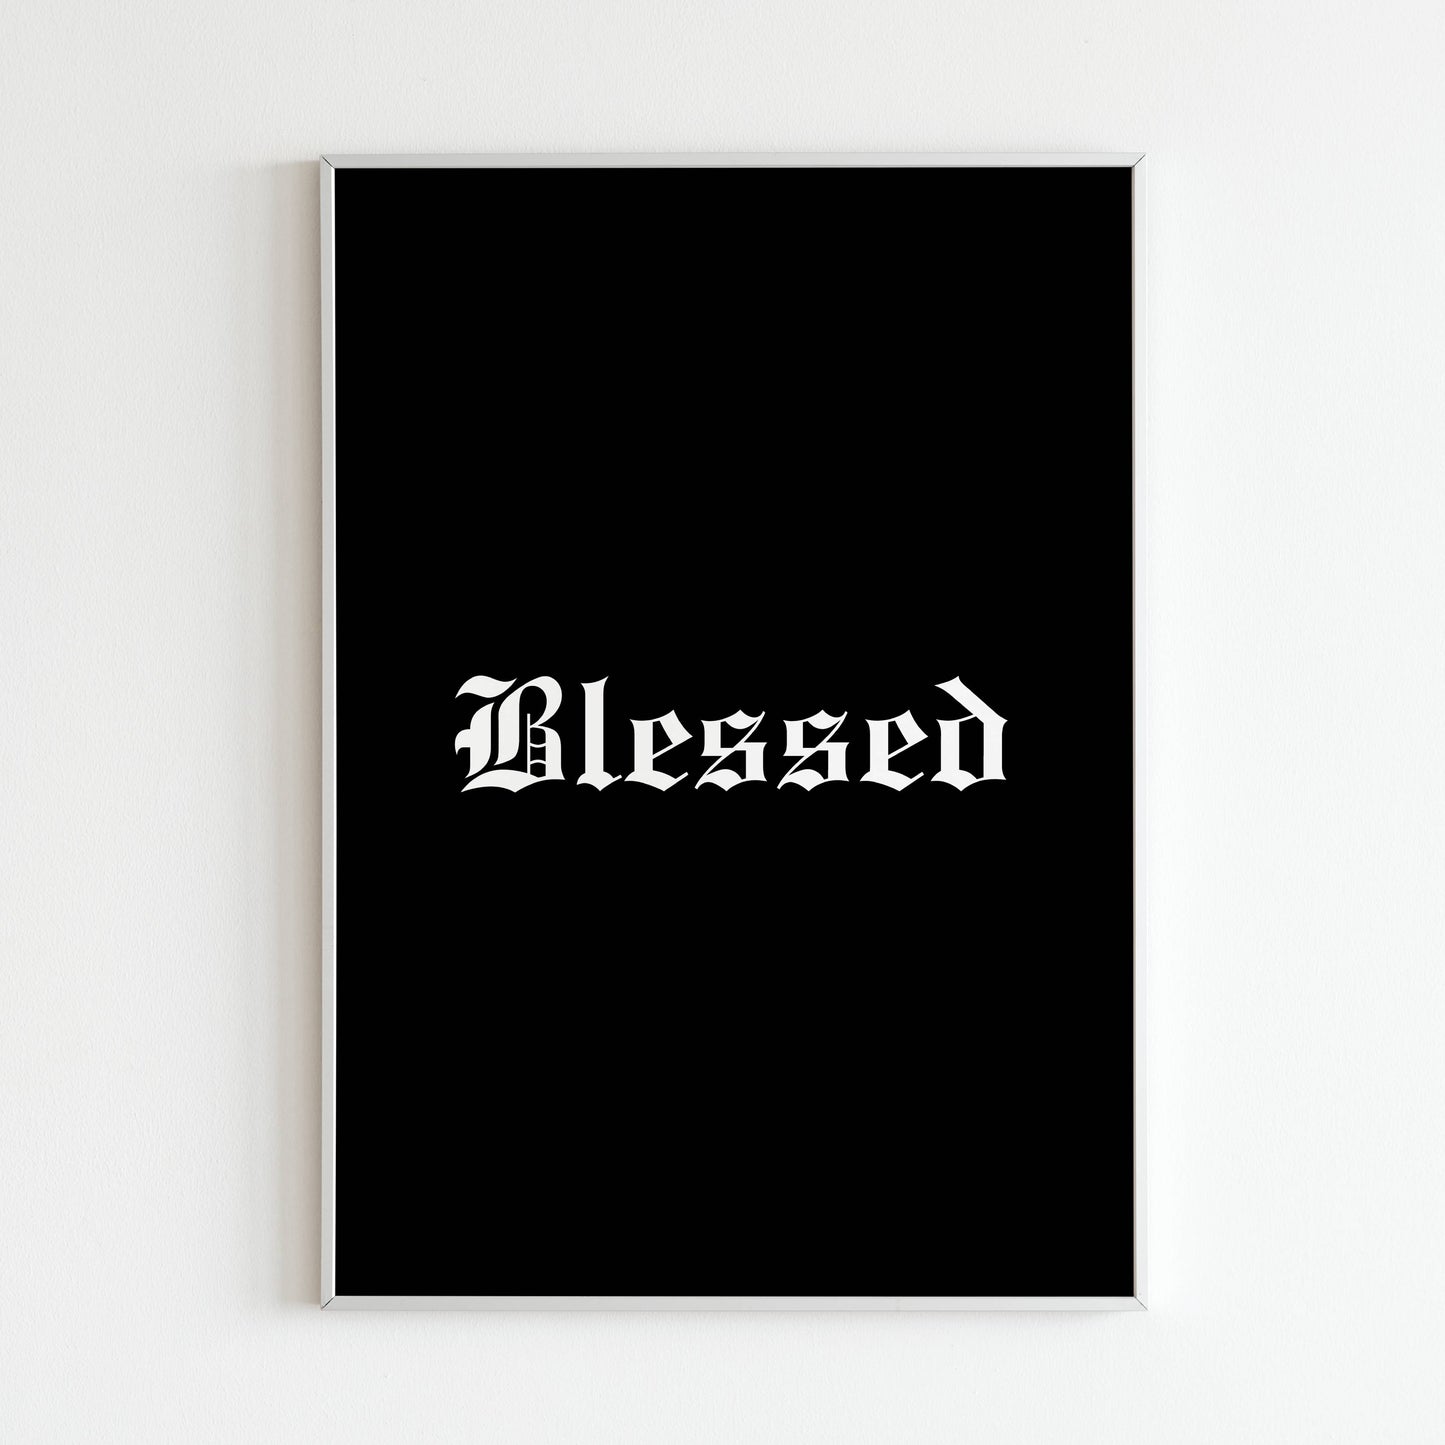 Downloadable "Blessed" art print for a message of gratitude.